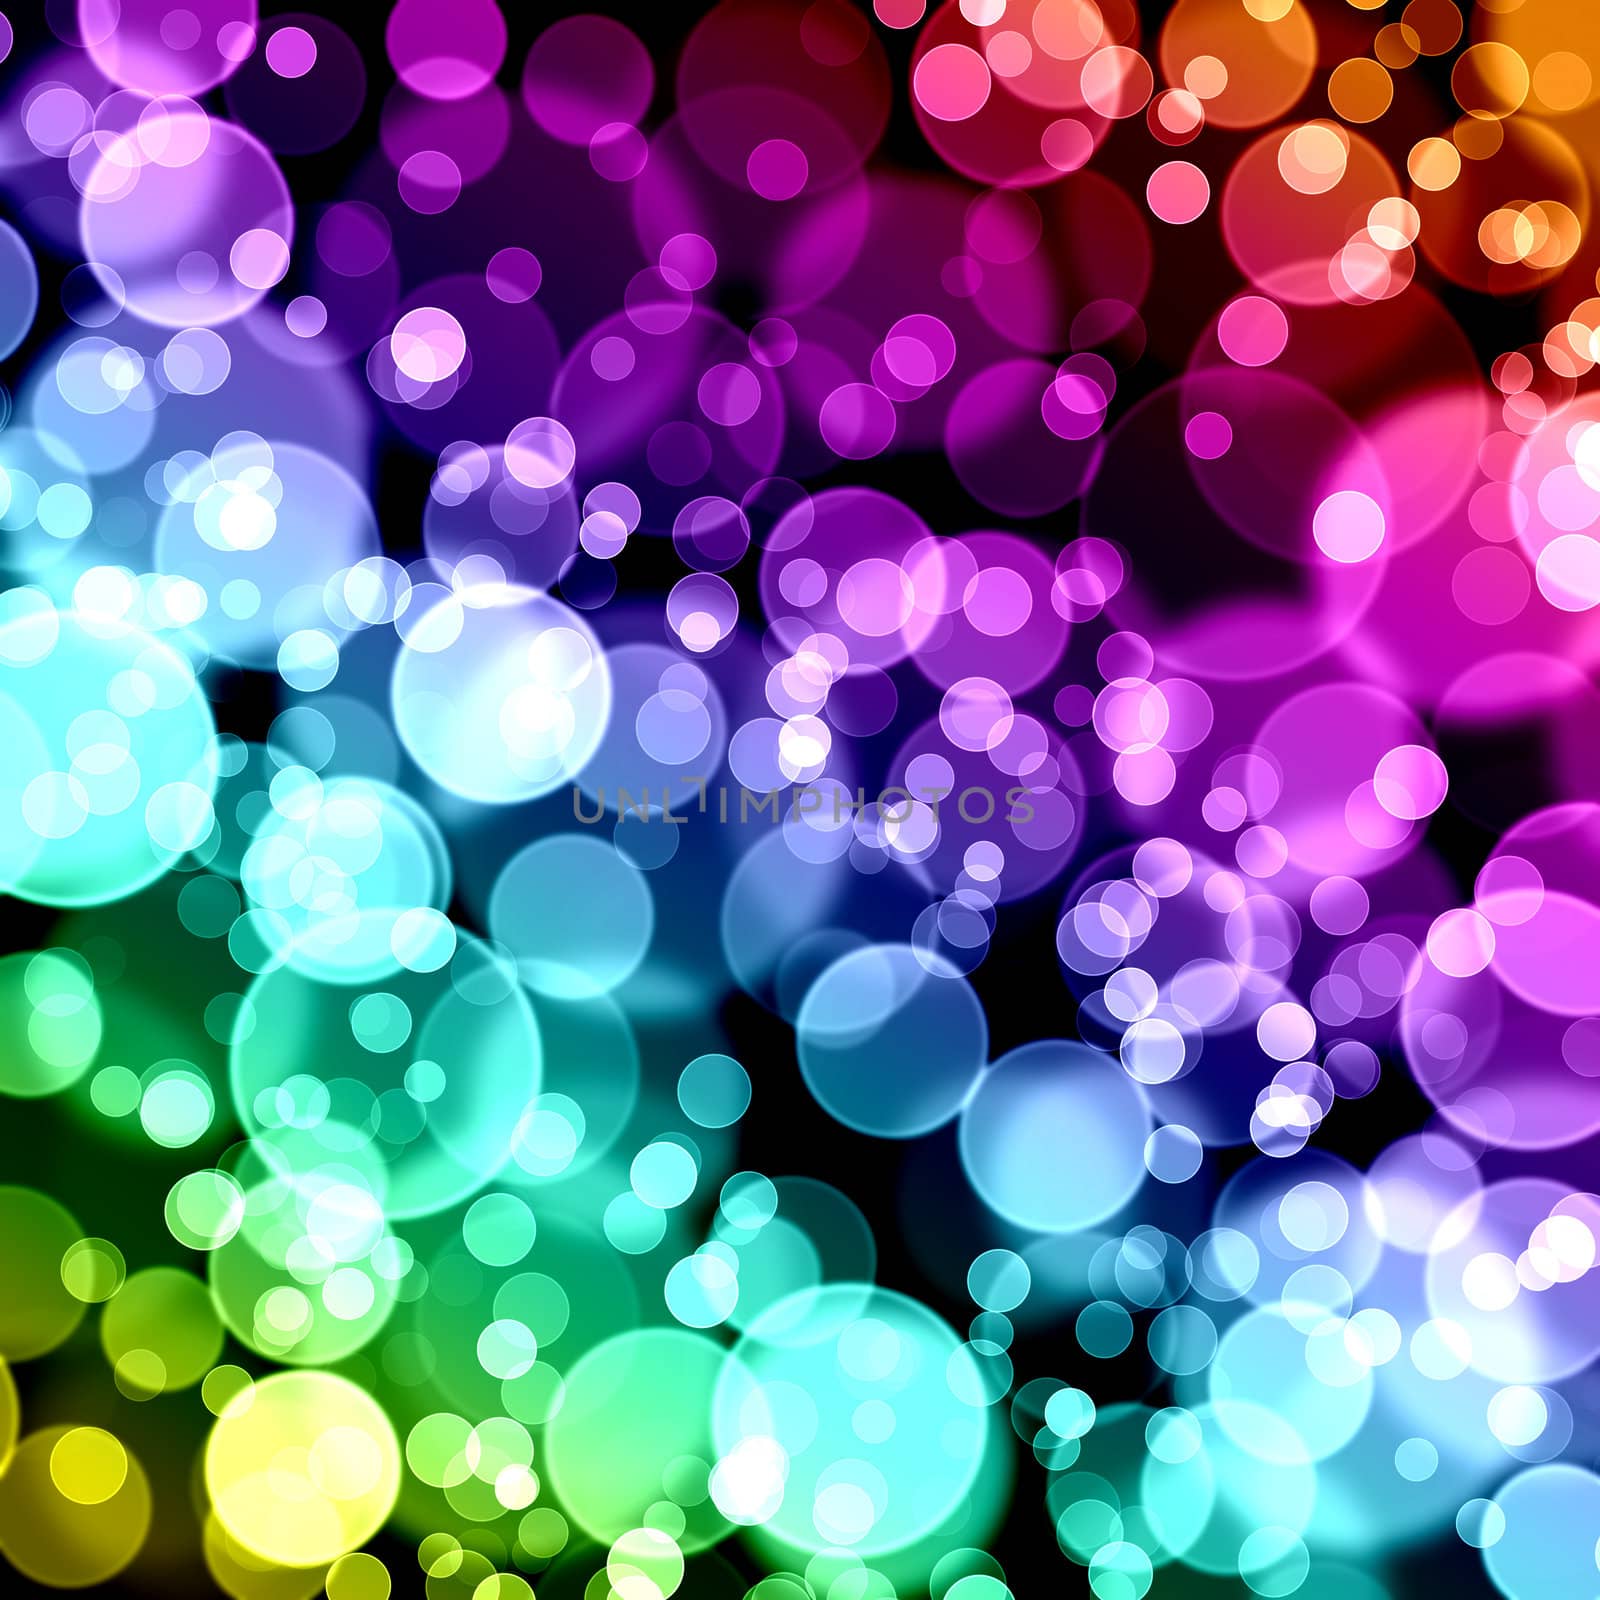 Digital bokeh background, Abstract background